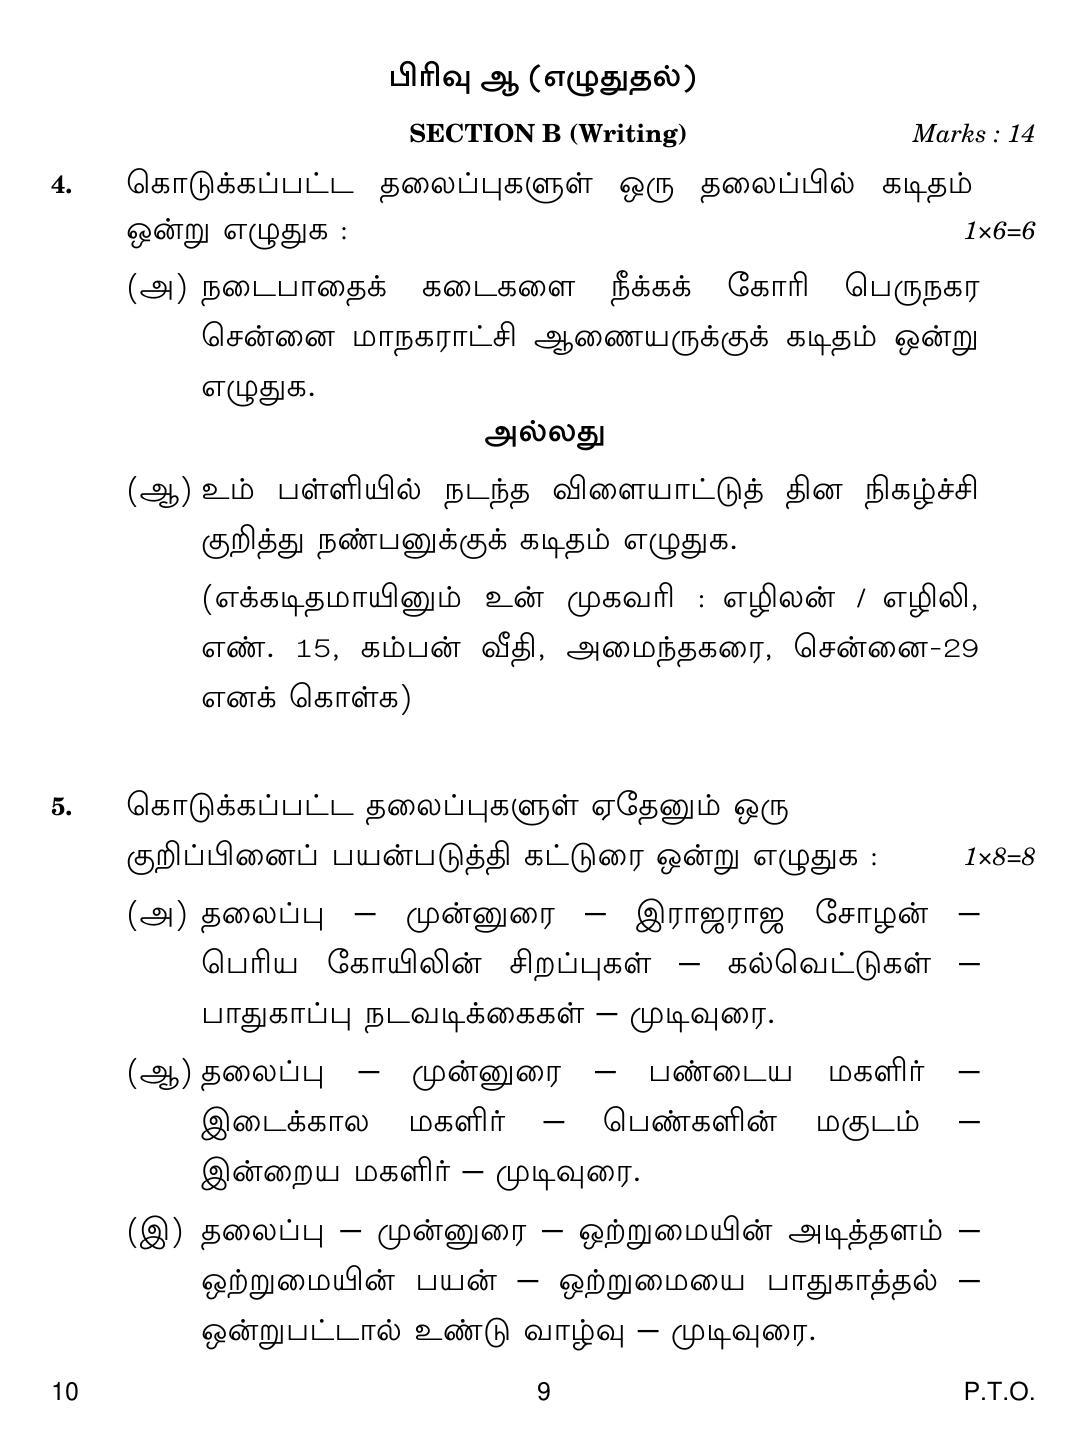 CBSE Class 10 10 Tamil 2019 Question Paper - Page 9